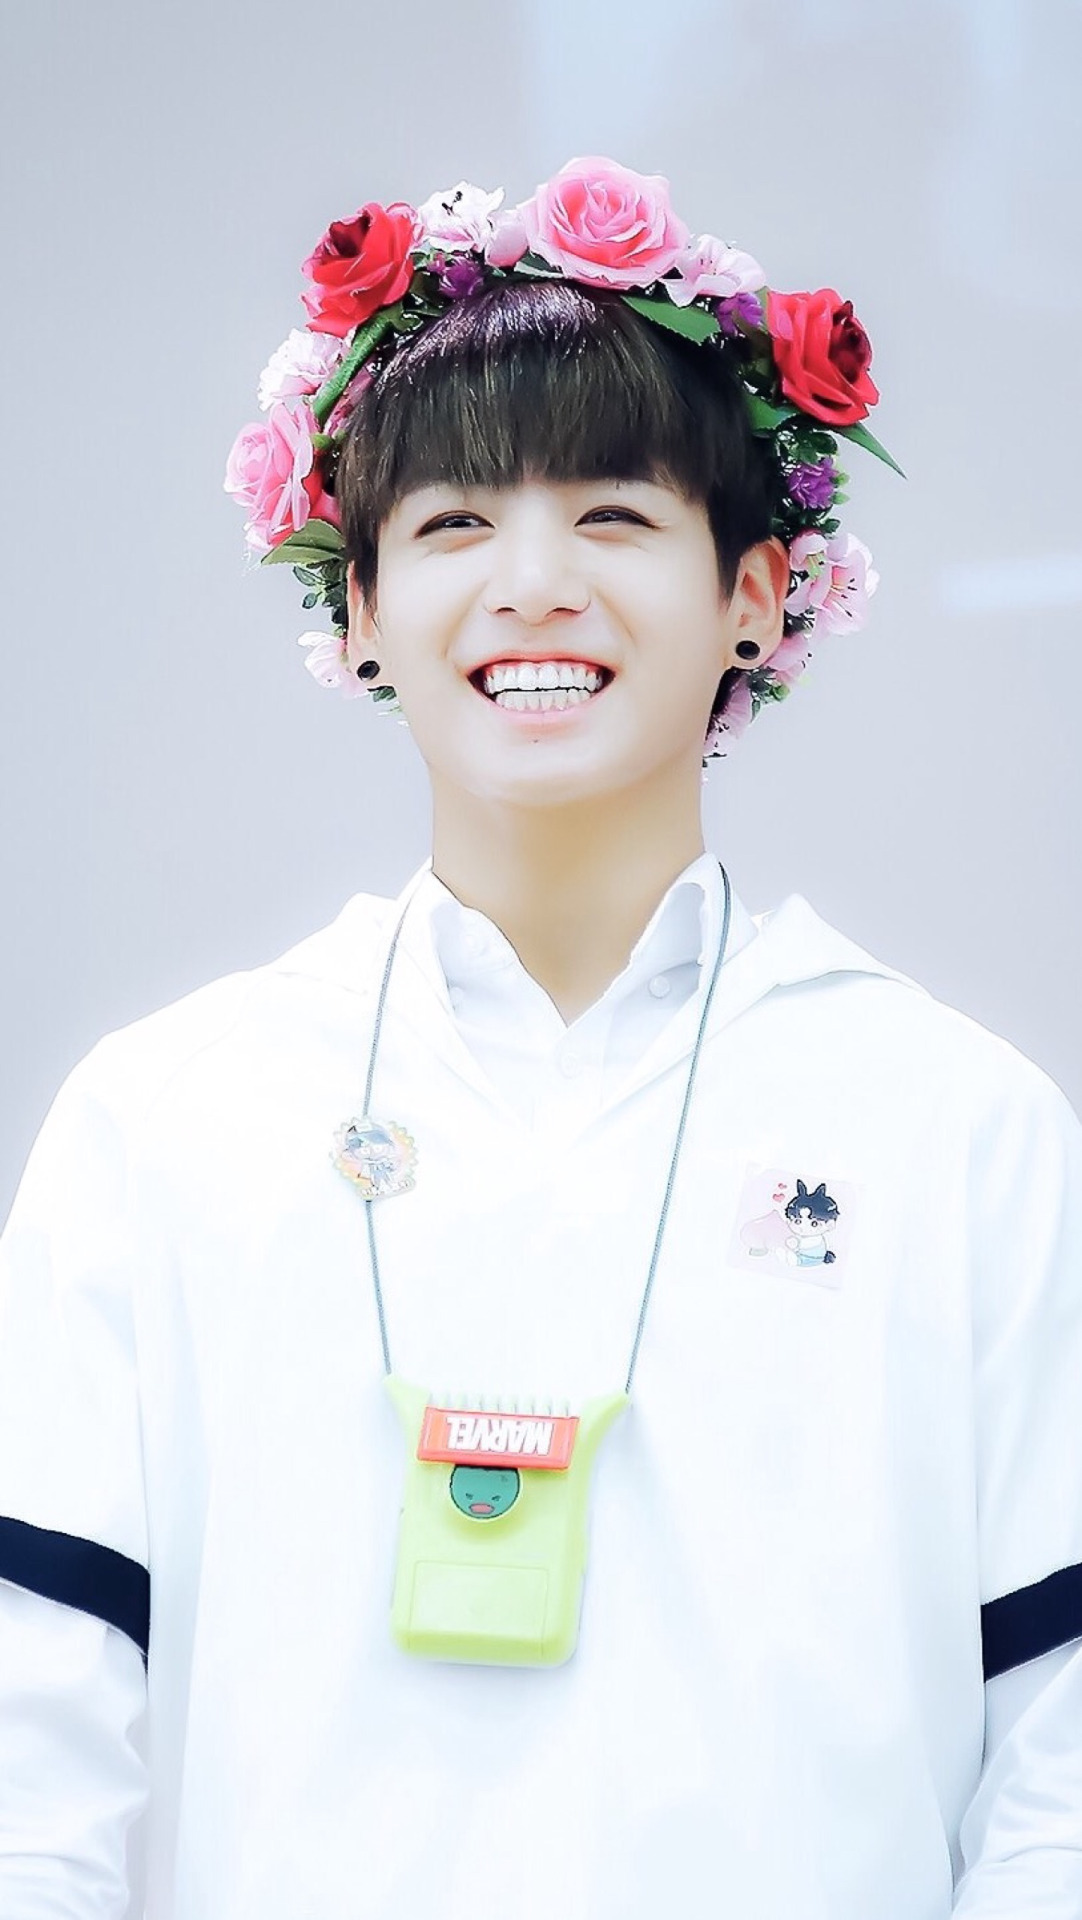 jungkook wallpaper hd,hairstyle,smile,hair accessory,headpiece,costume